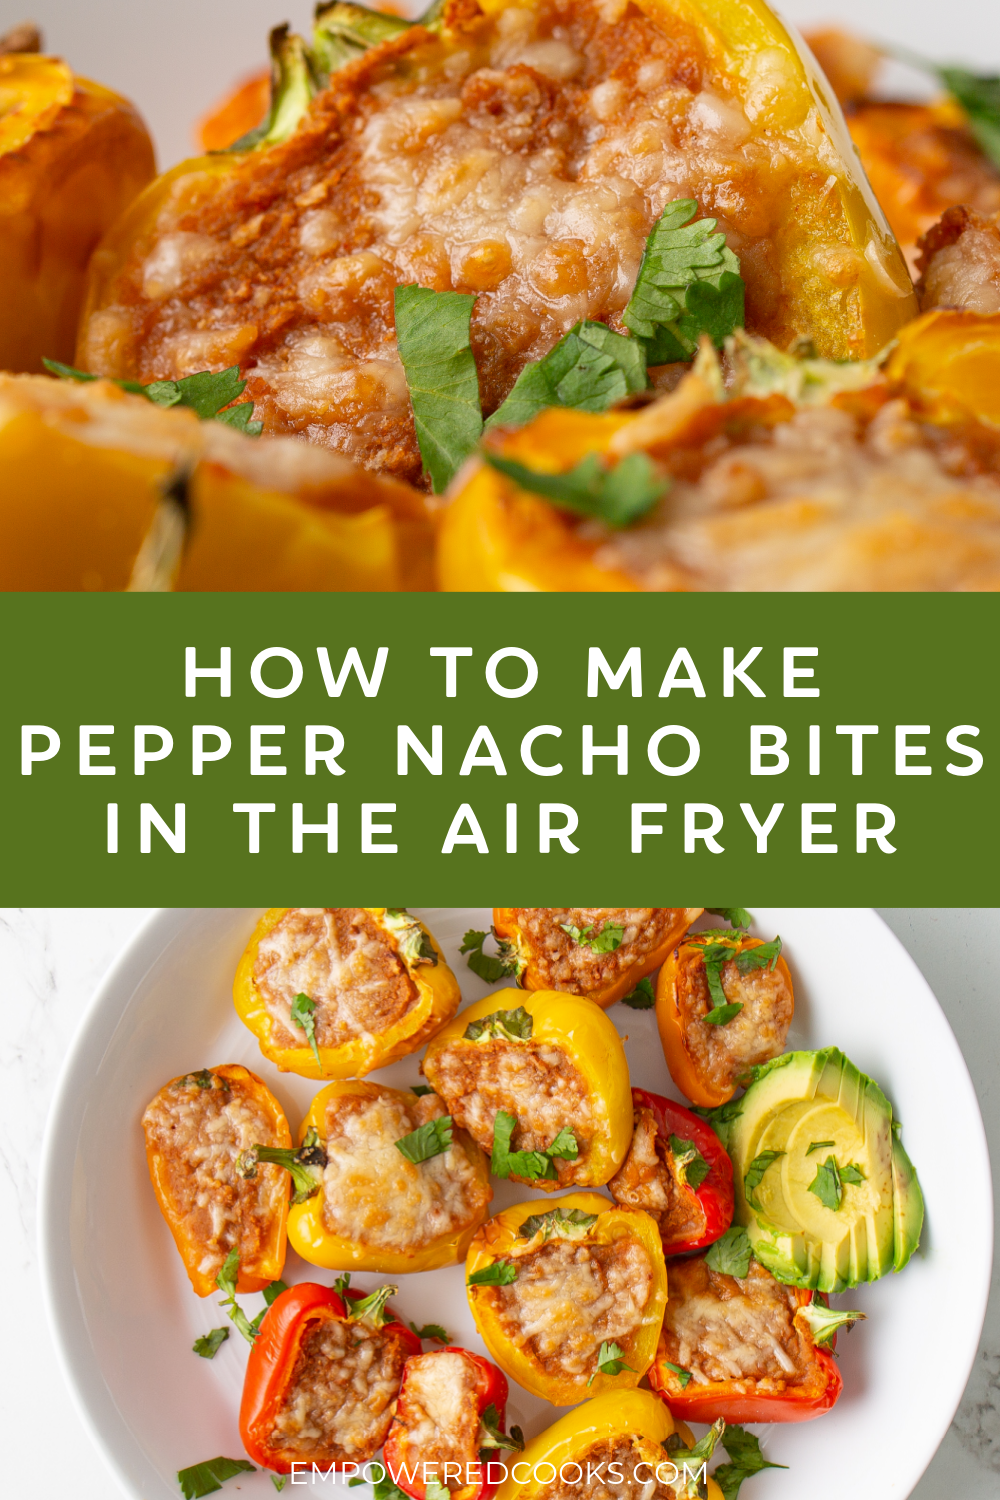 how to make apepper nacho bites in the air fryer